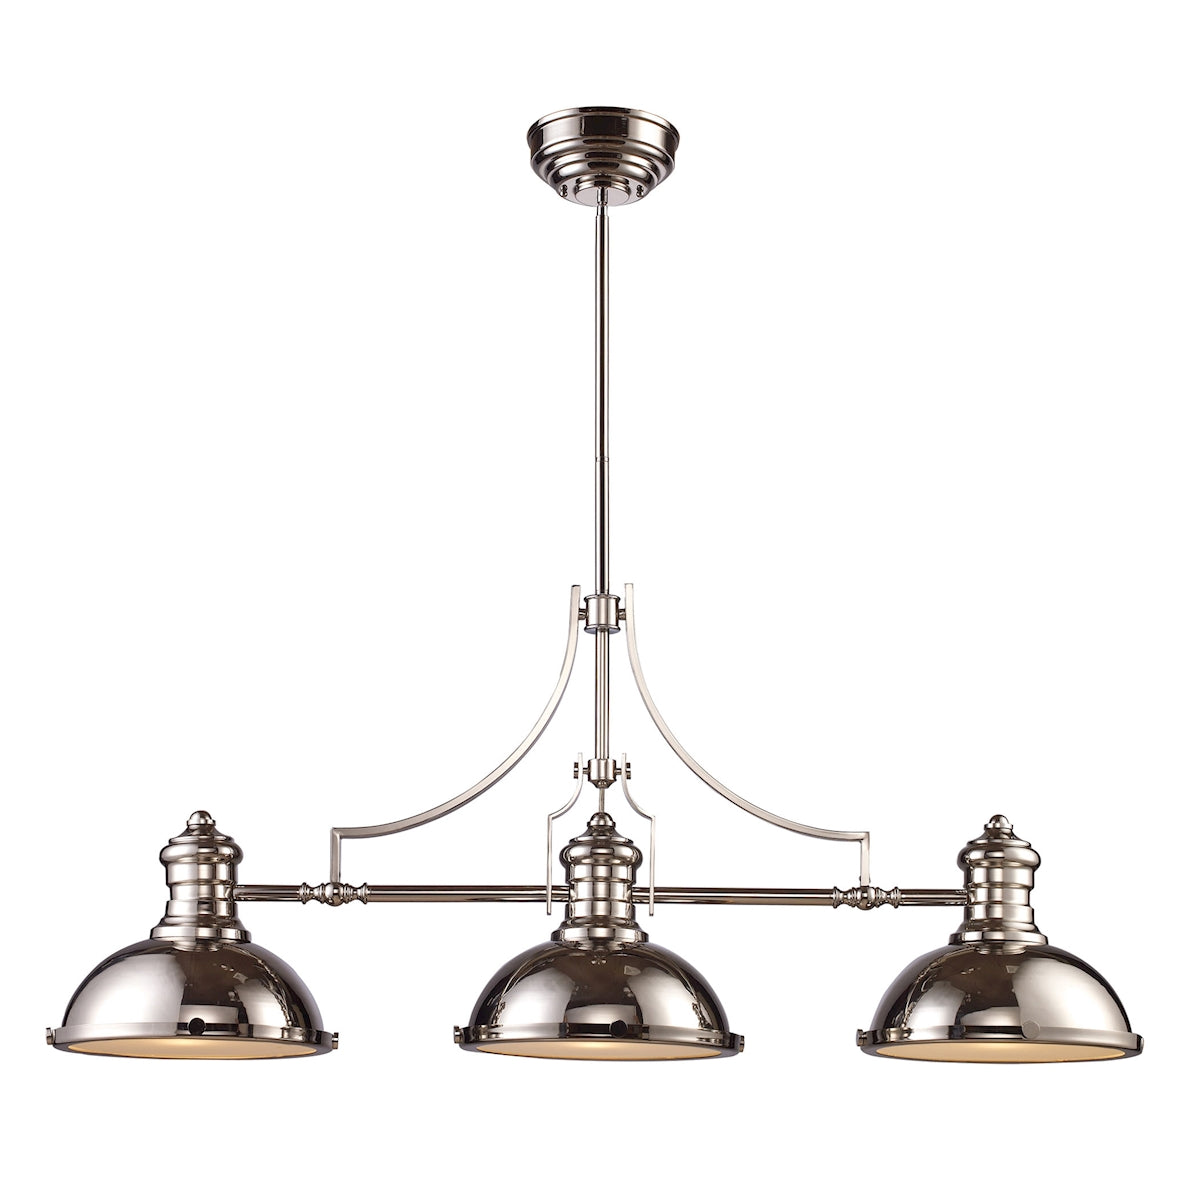 Chadwick 3-Light Island Light in Polished Nickel with Matching Shades